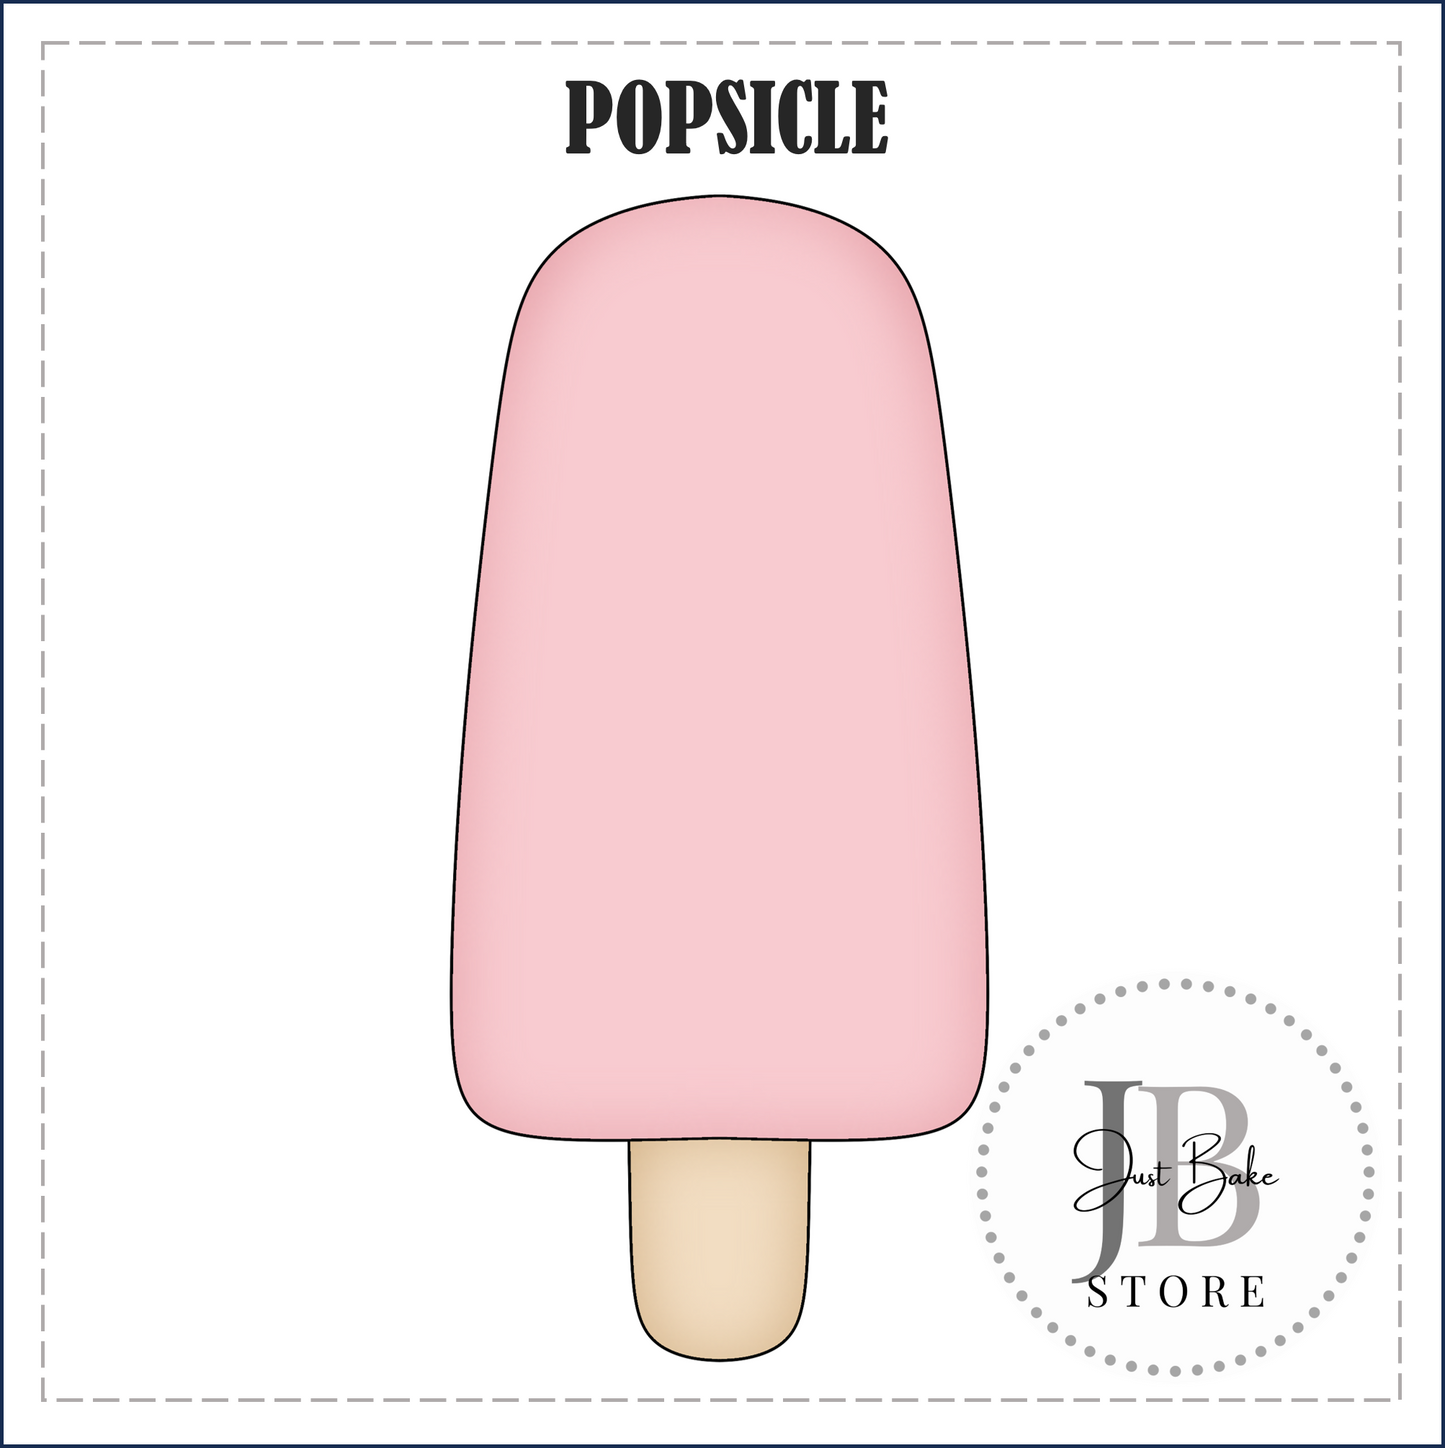 J310 - POPSICLE COOKIE CUTTER